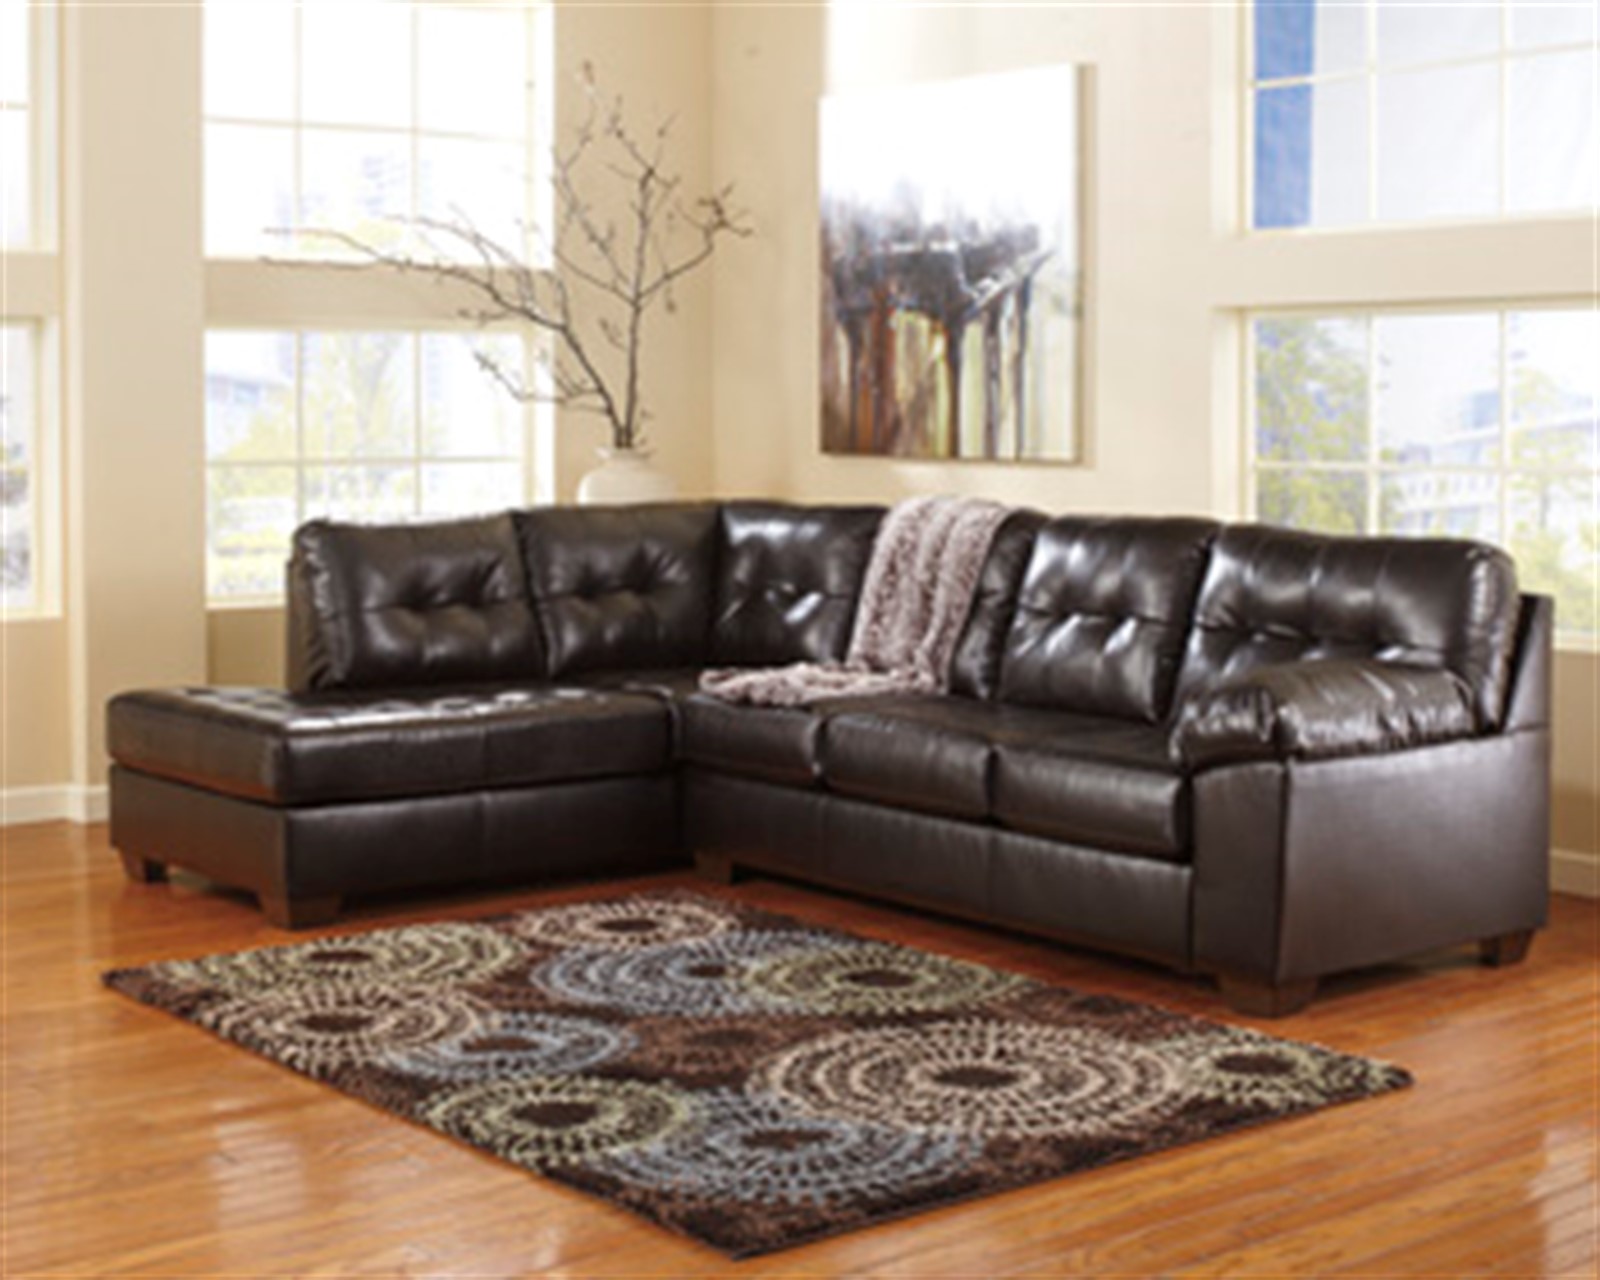 Furniture Store Cheap Prices Near Me Sears Outlet